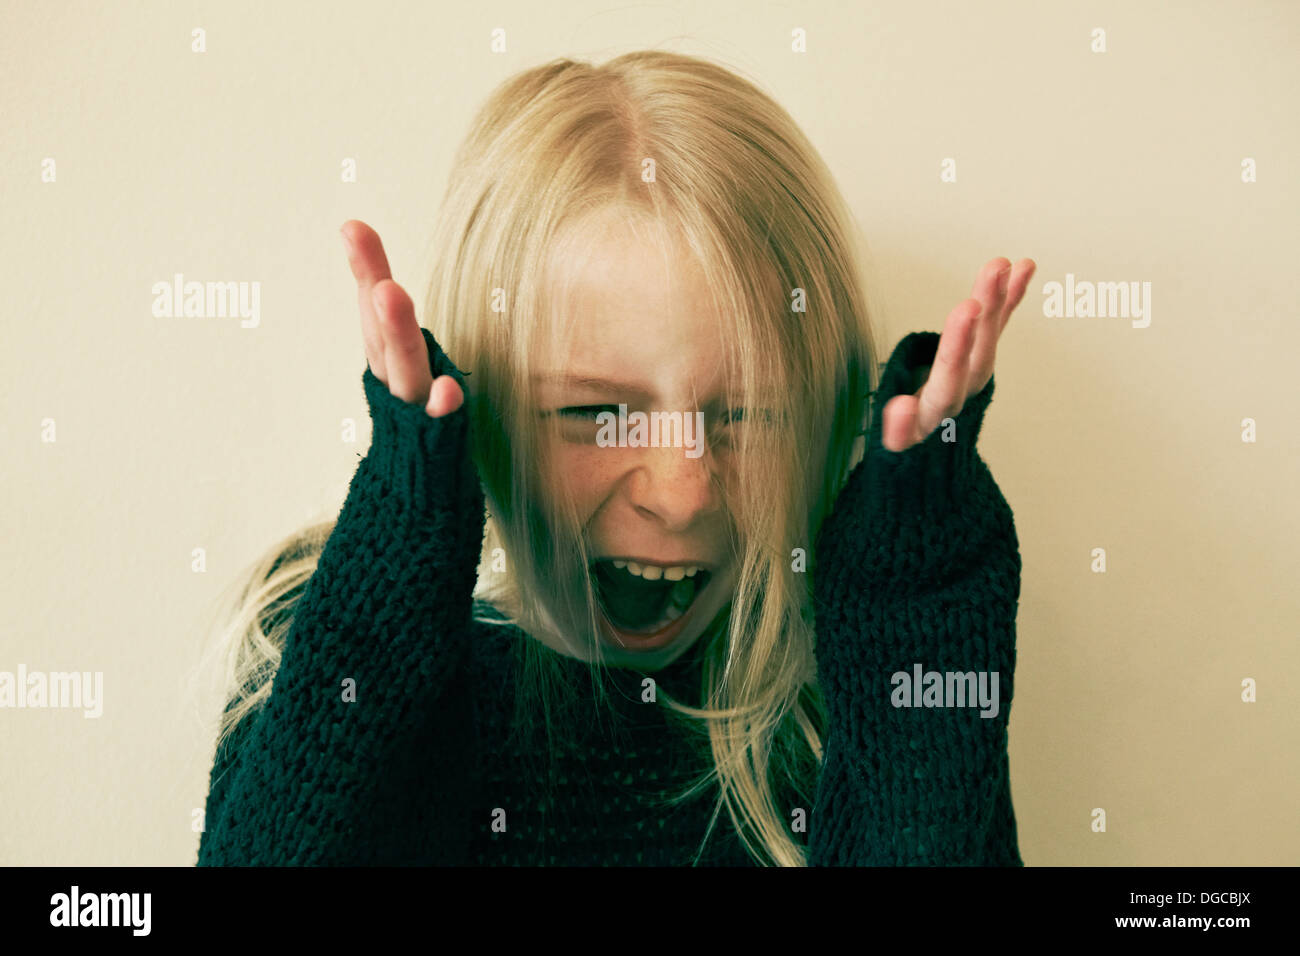 Young girl screaming, close up Stock Photo